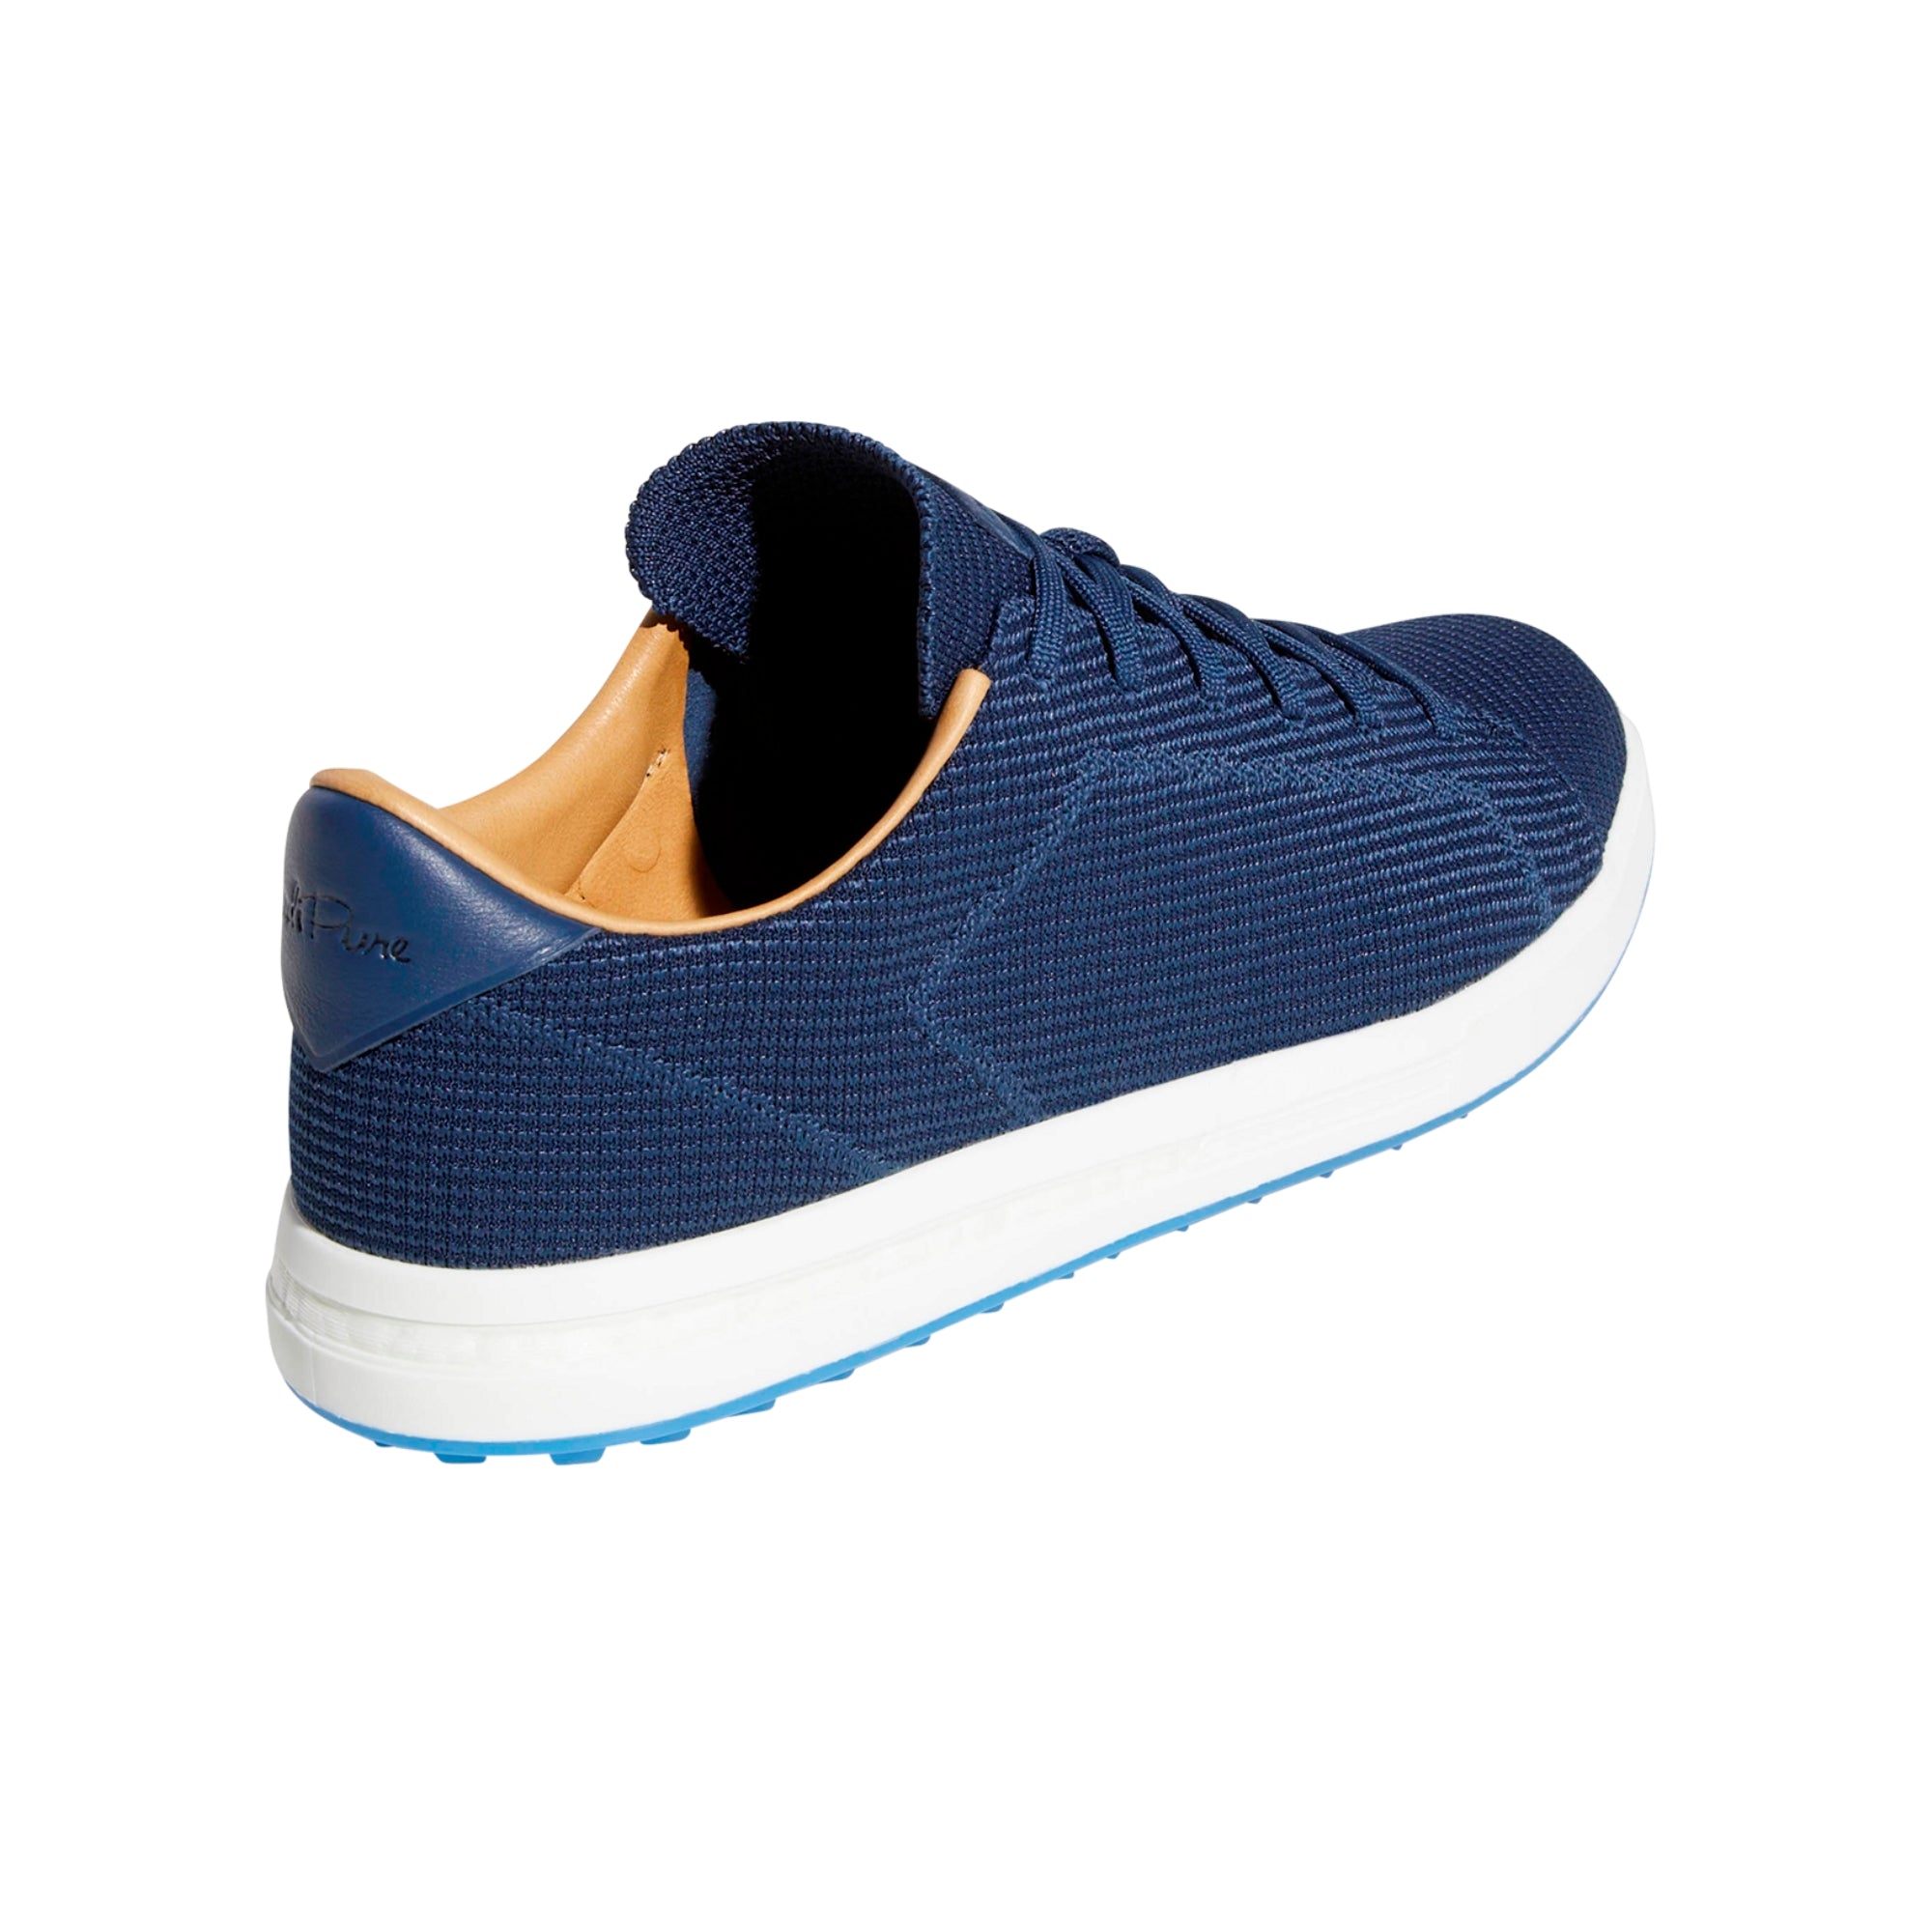 adidas AdiPure SP Knit Golf Shoes BB7890 Rich Blue Collegiate Navy ...